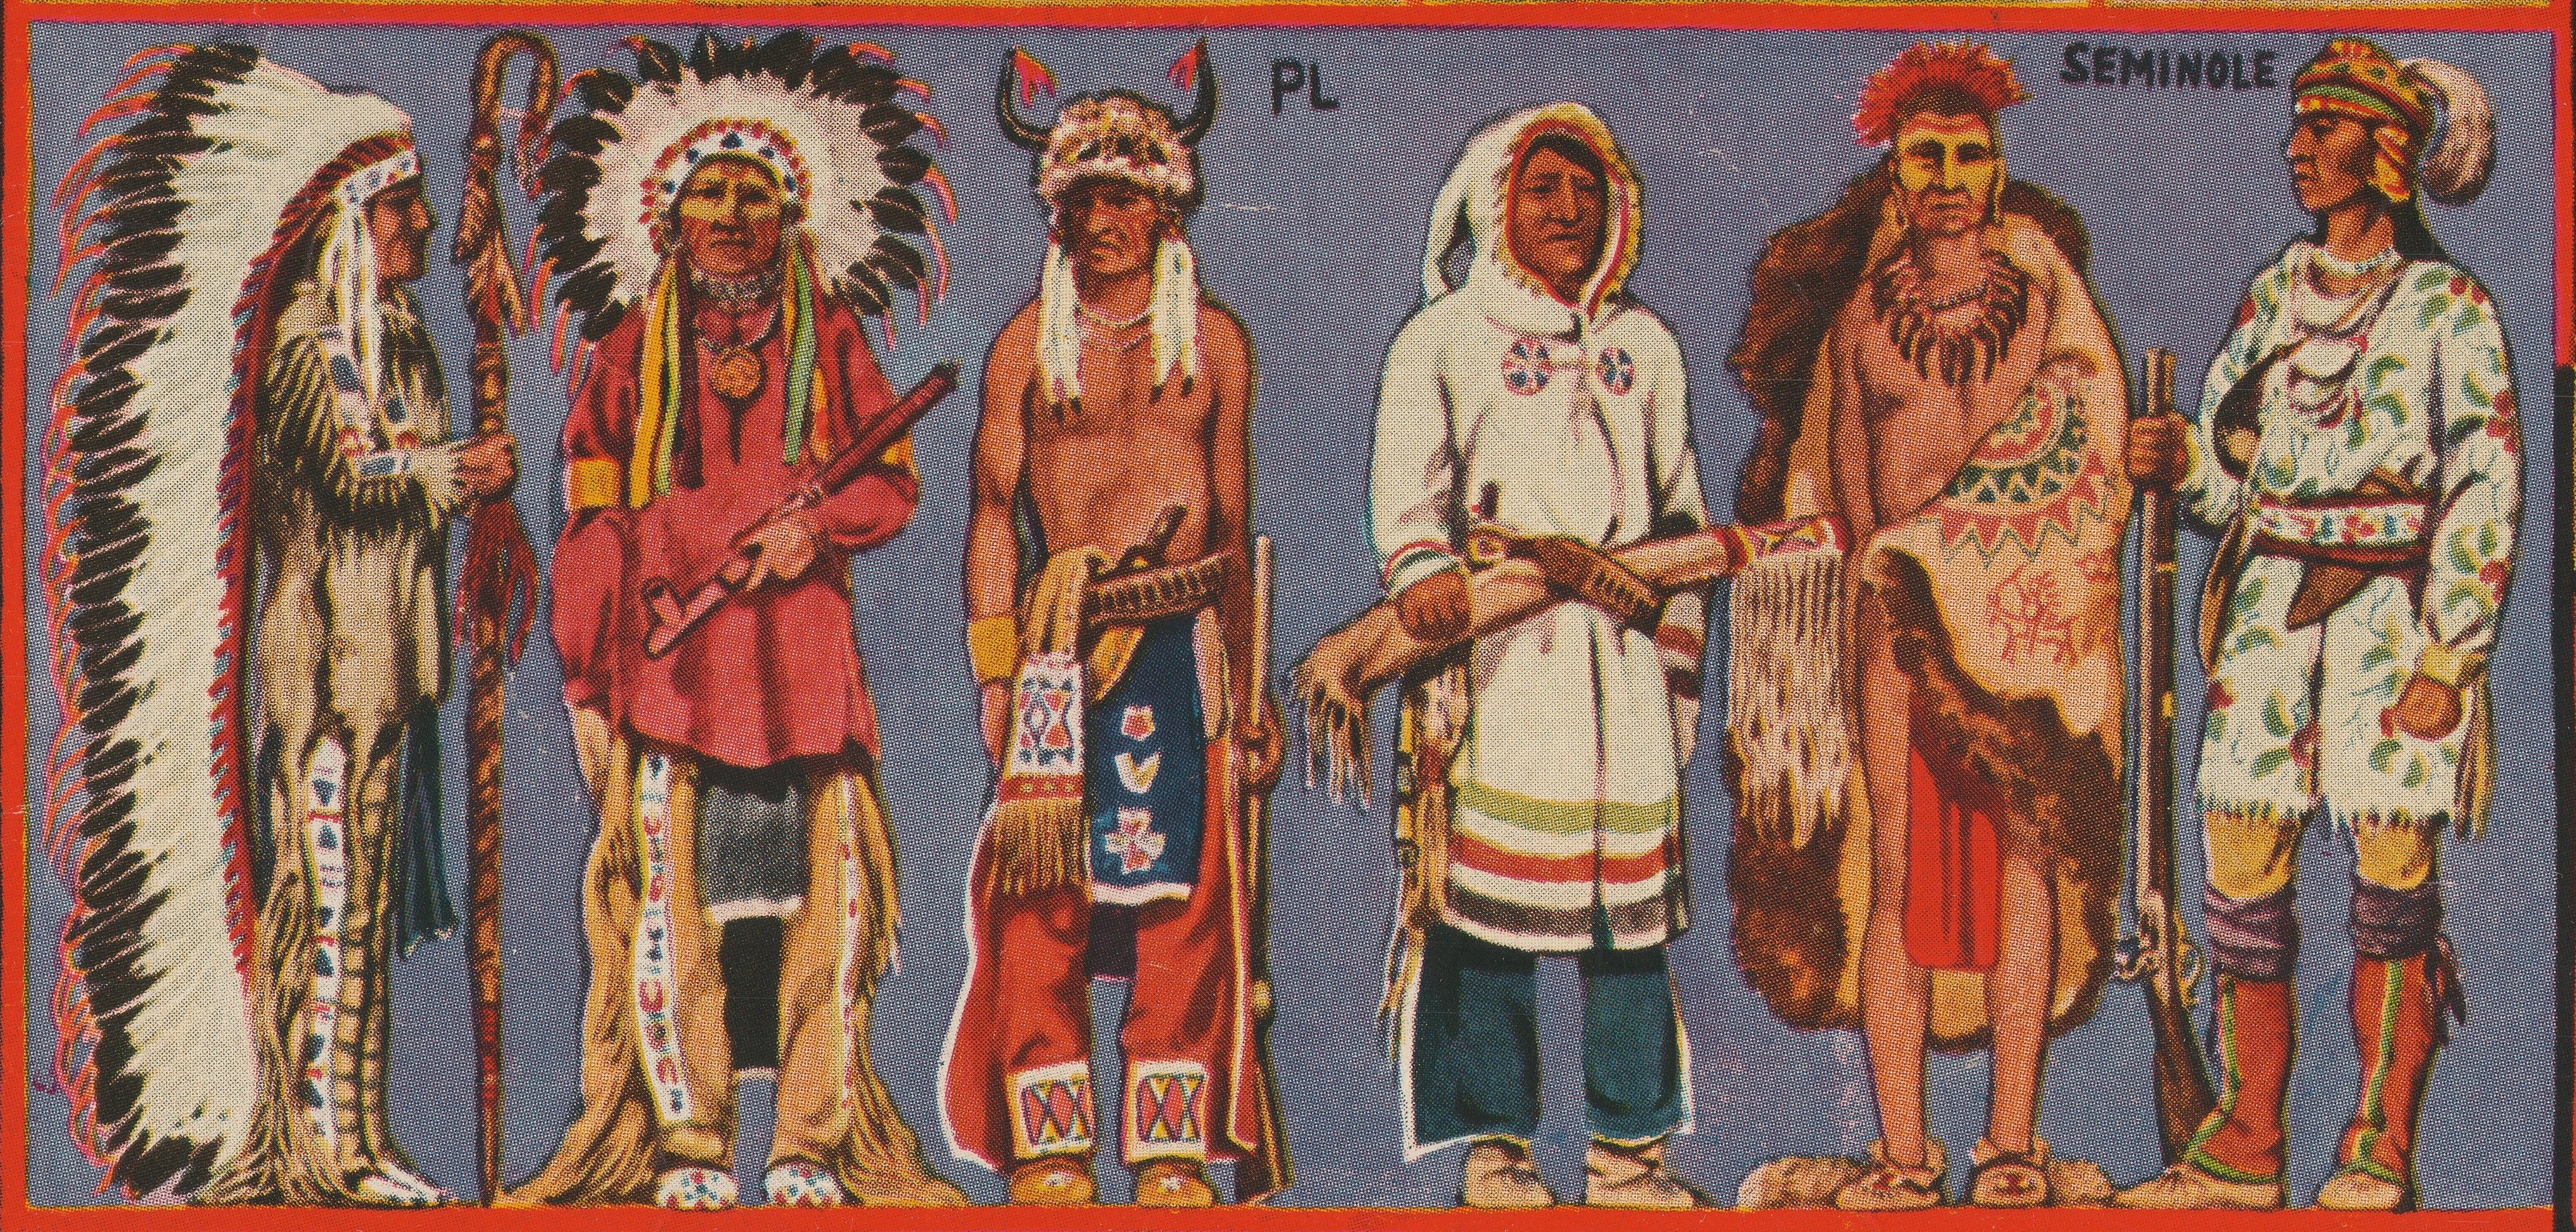 Artistic depiction of Native American tribes in traditional dress.